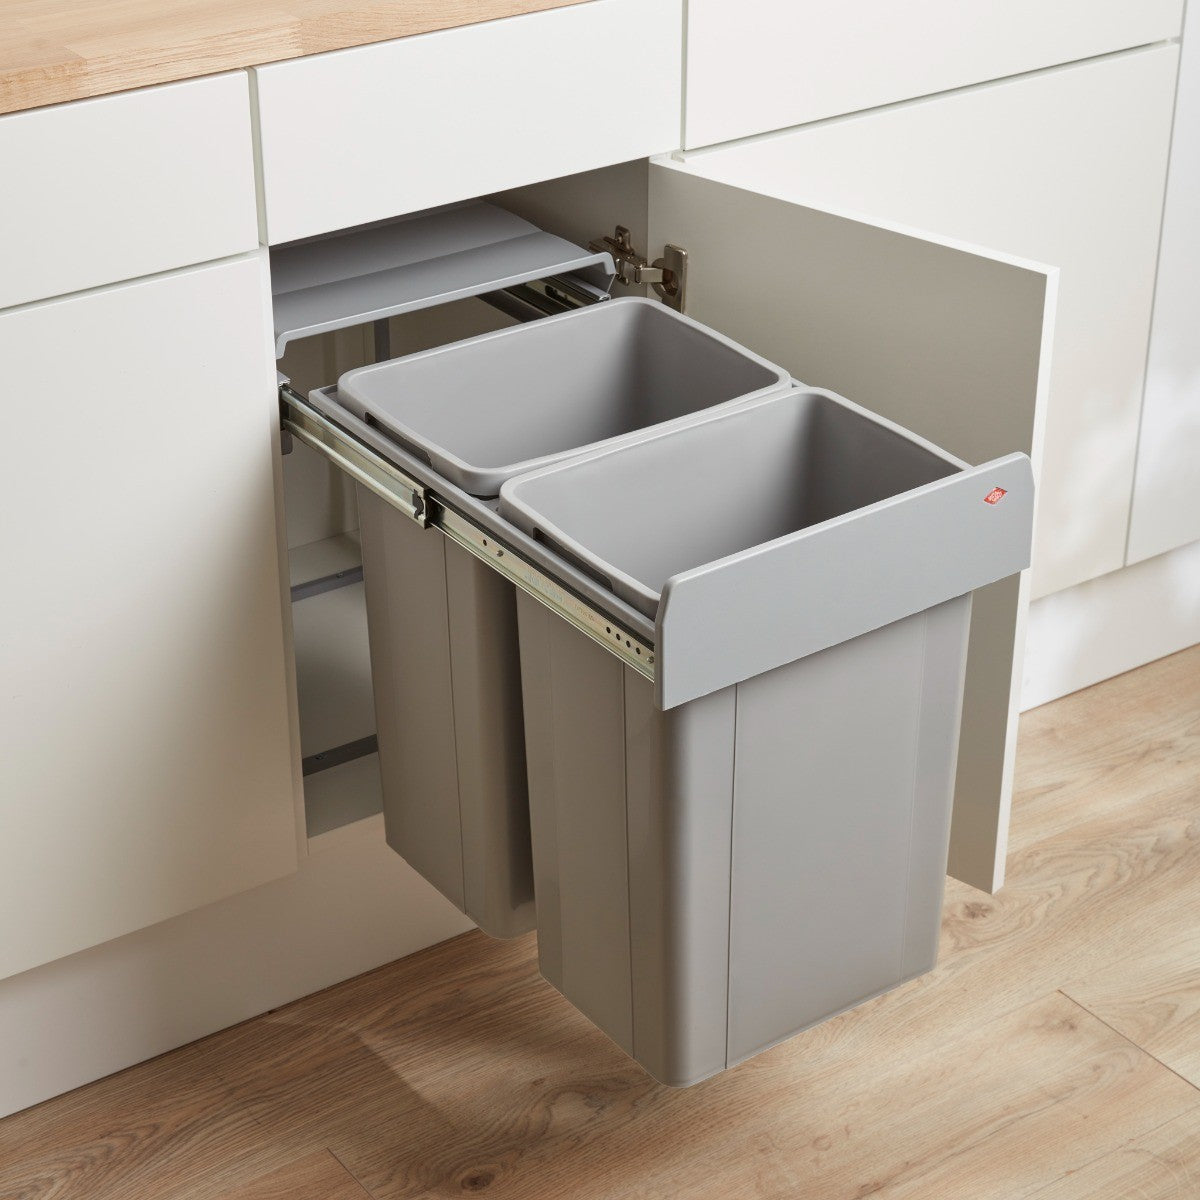 Wesco Big Bio Double 52L 2-Compartment kitchen Recycling bin for 600mm Hinged Door kitchen Cabinets